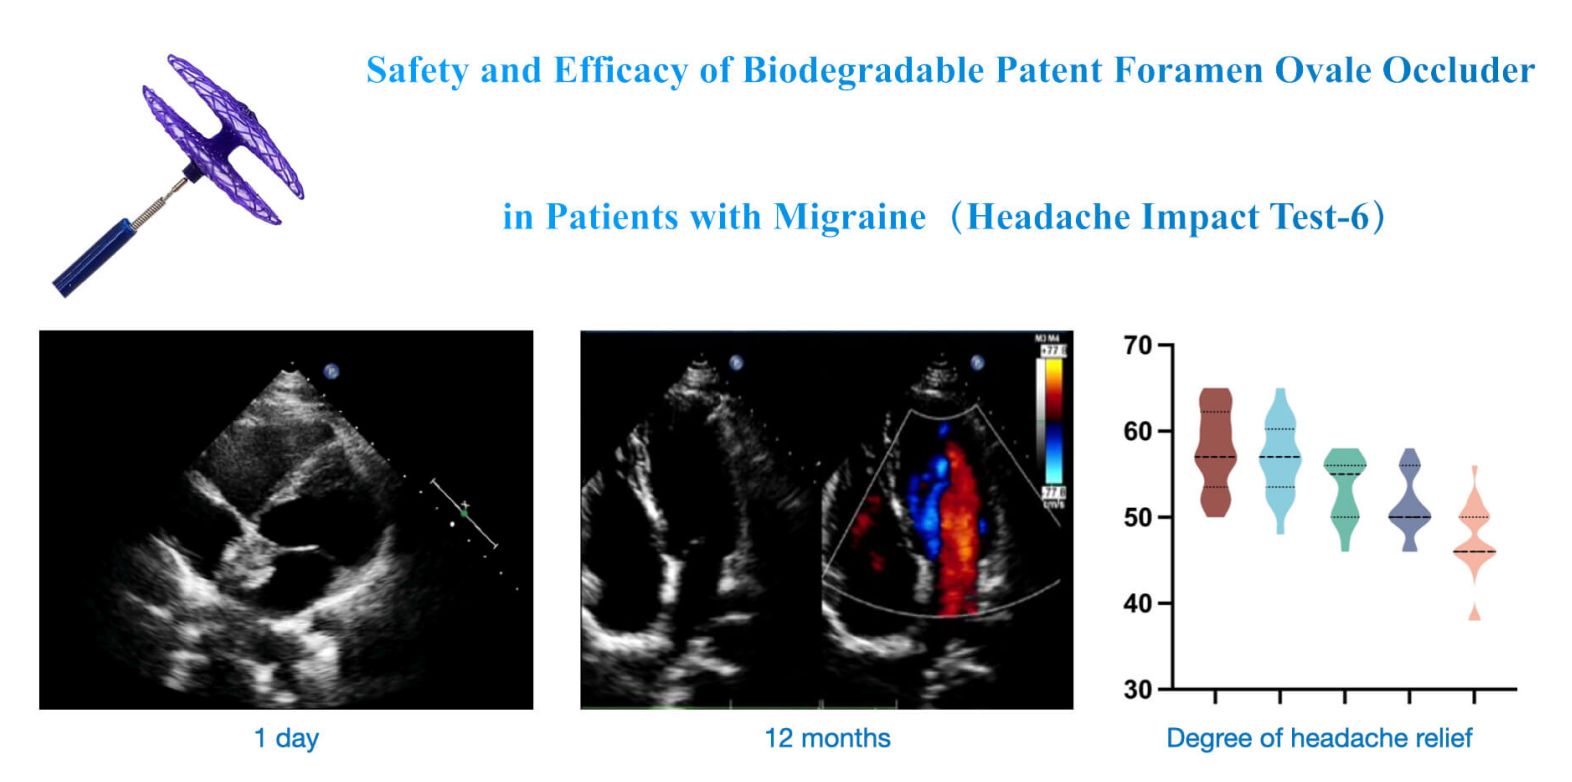 Safety and Efficacy of Biodegradable Patent Foramen Ovale Occluder in Patients with Migraine: A Clinical Trial